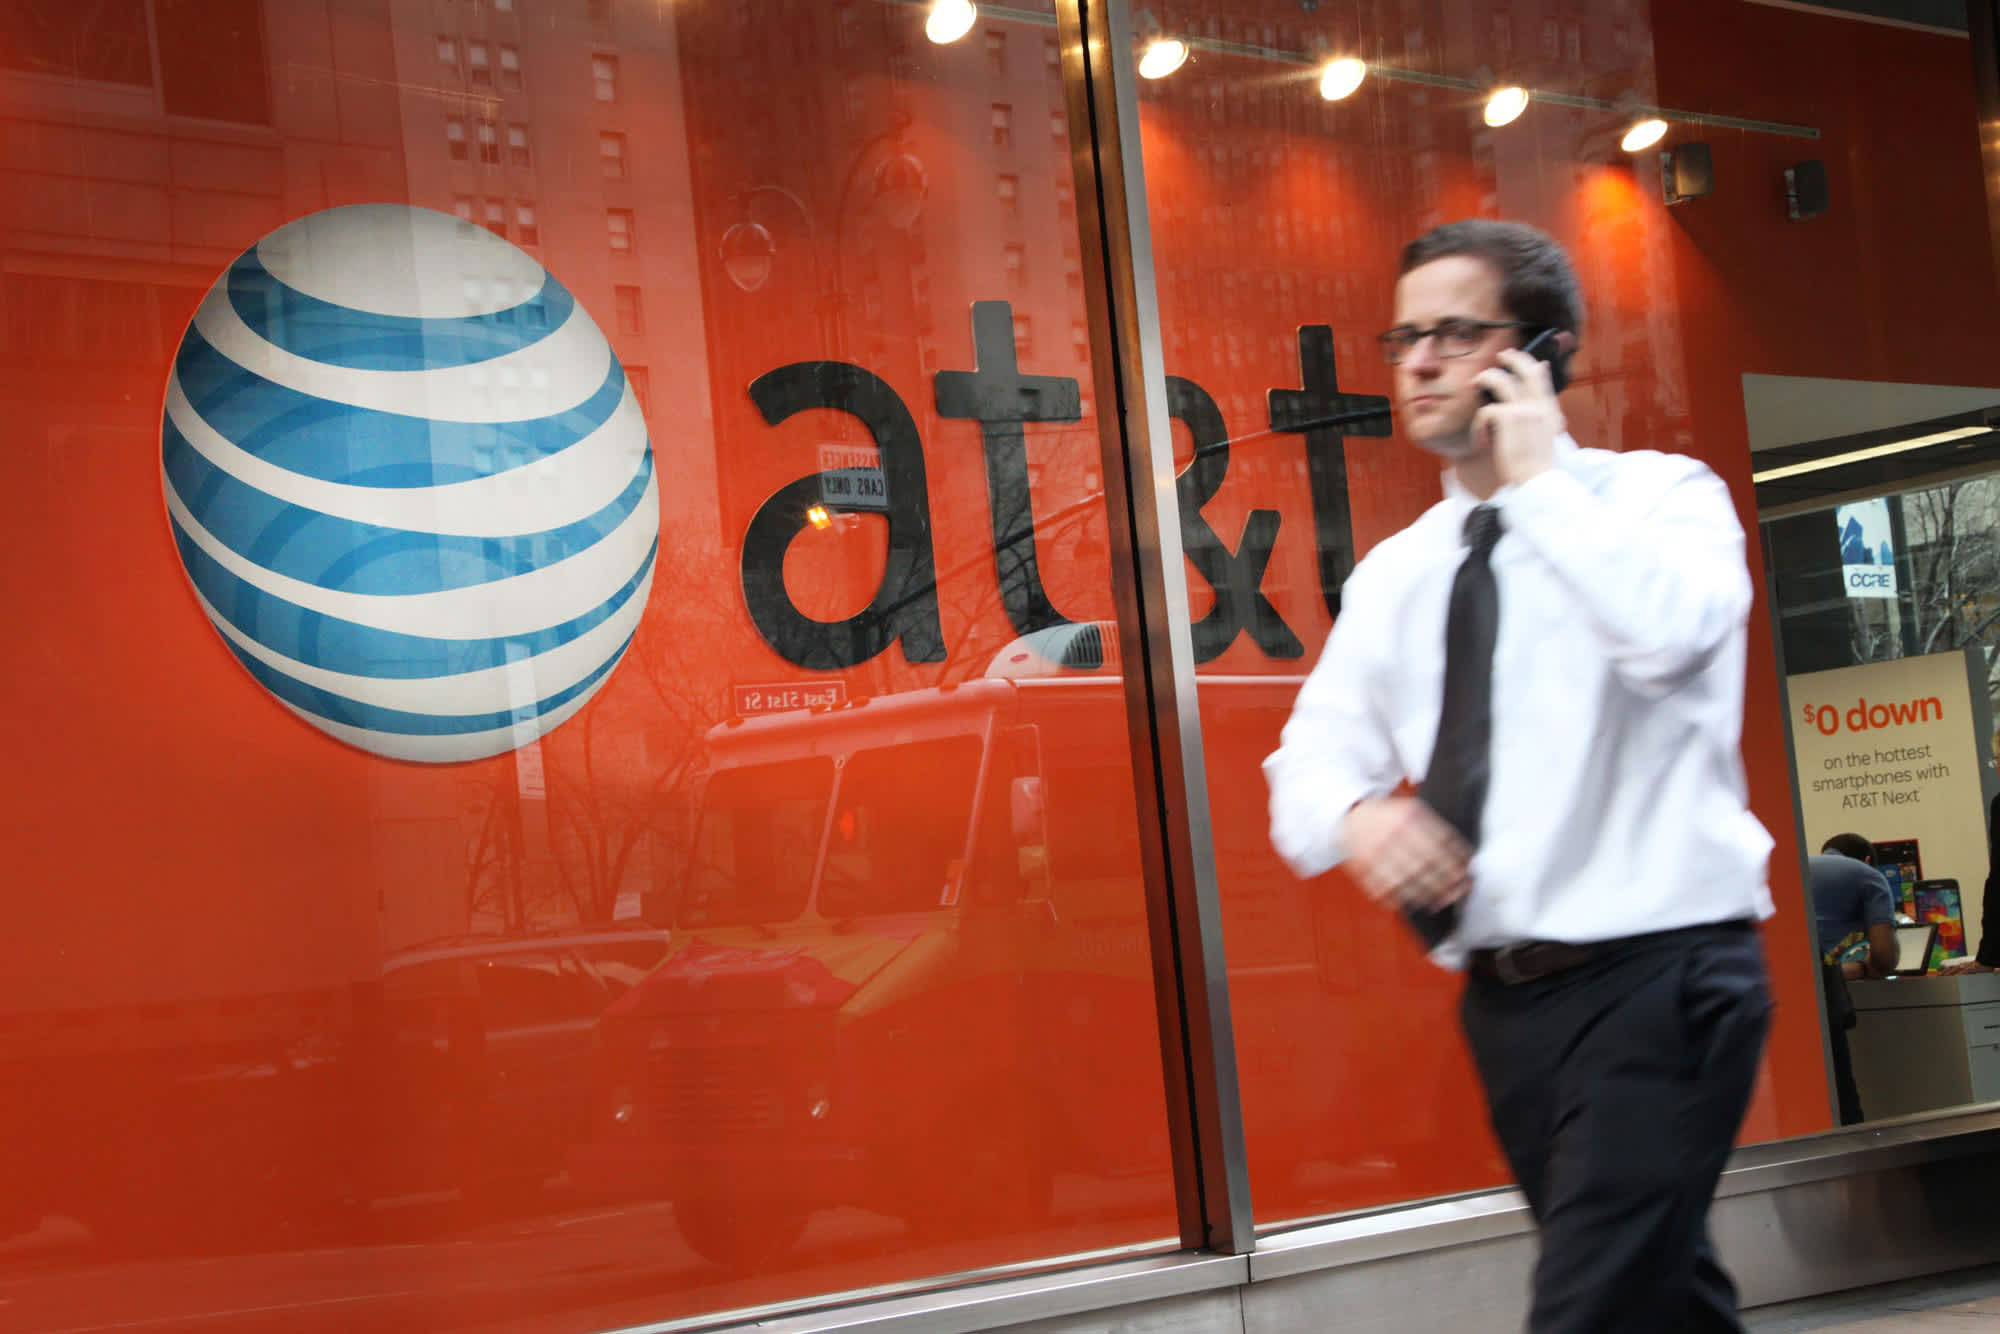 71 Million User’s Data From AT&T Got Exposed in a Recent Data Breach